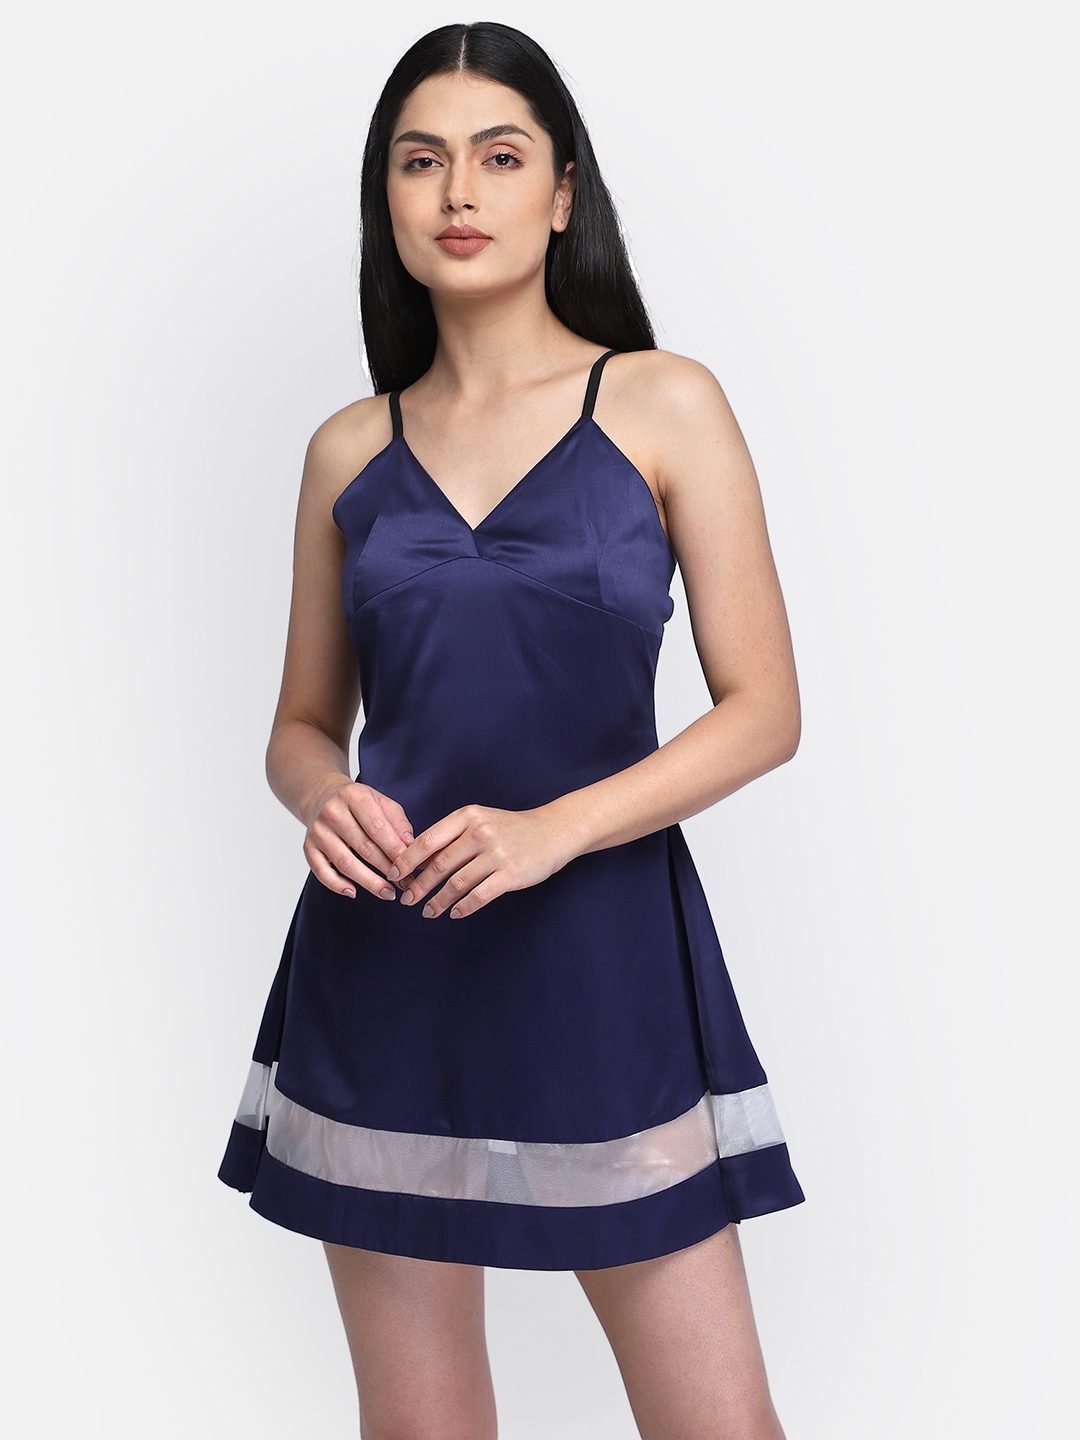 Smarty Pants | Smarty Pants women's silk satin navy blue color sheer white cut out baby doll. 